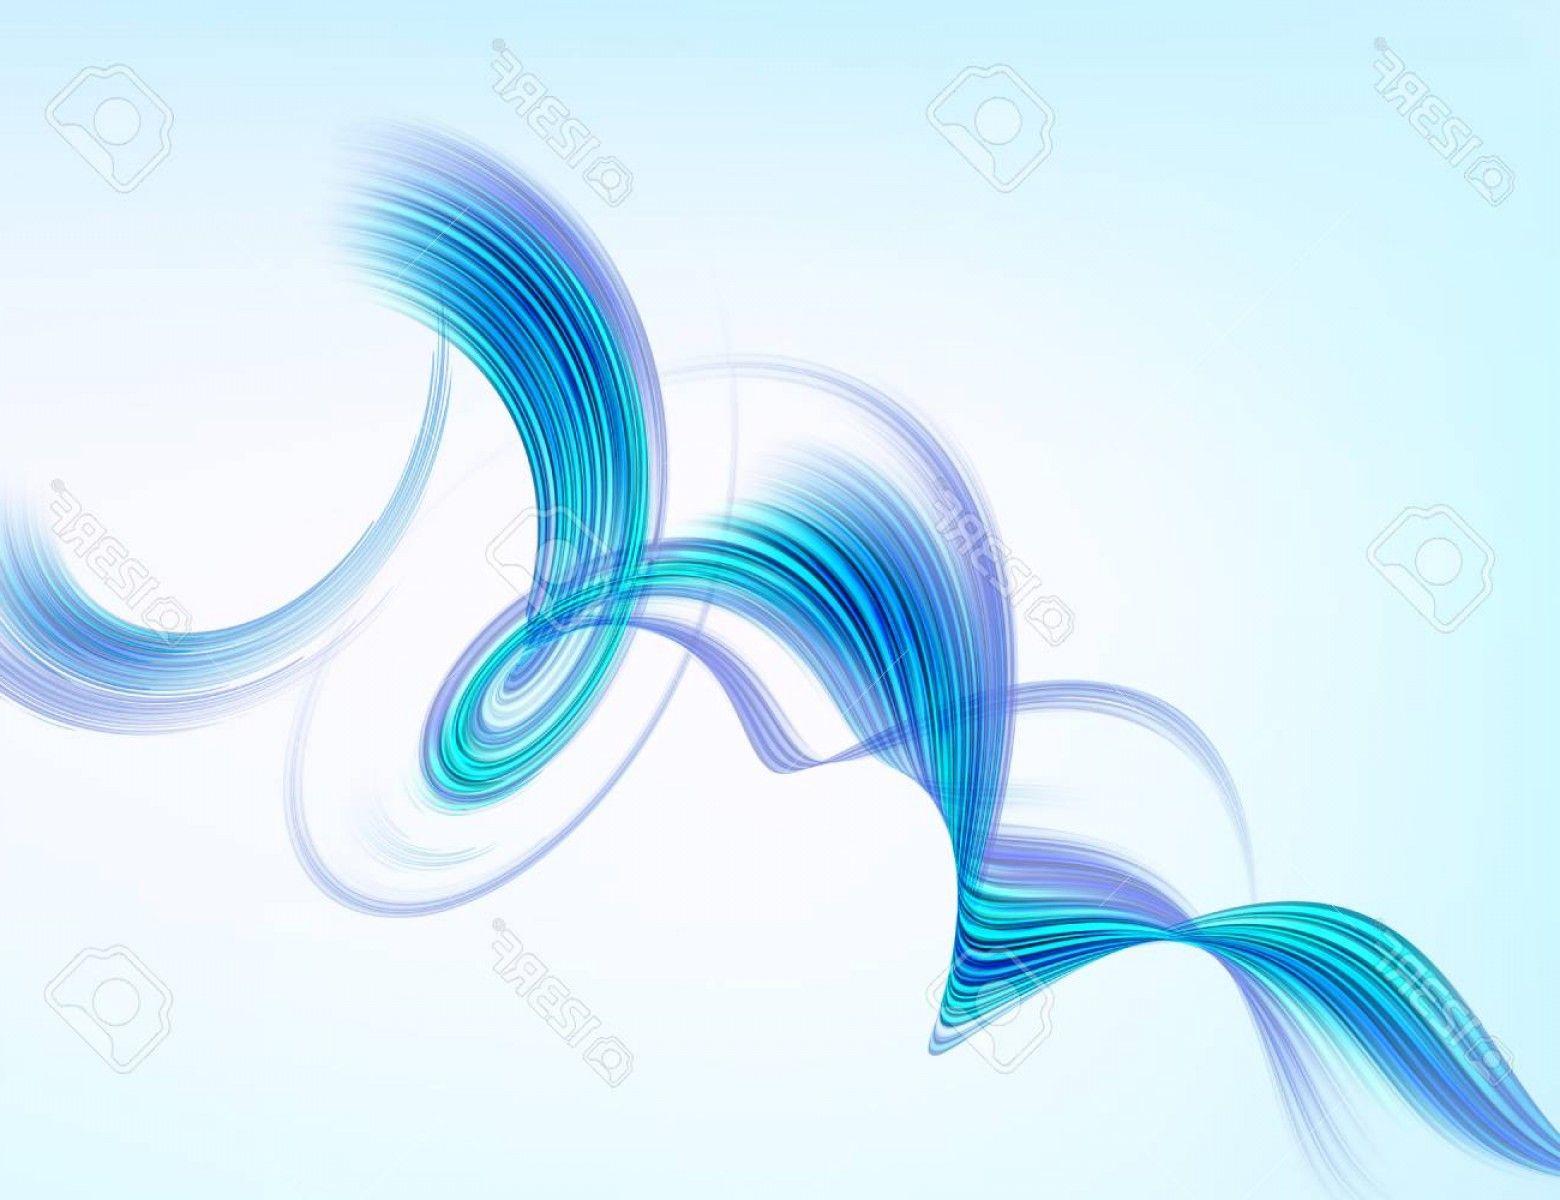 Blue and White Swirl Logo - Photostock Vector Vector Background Abstract Blue Swirl Isolated On